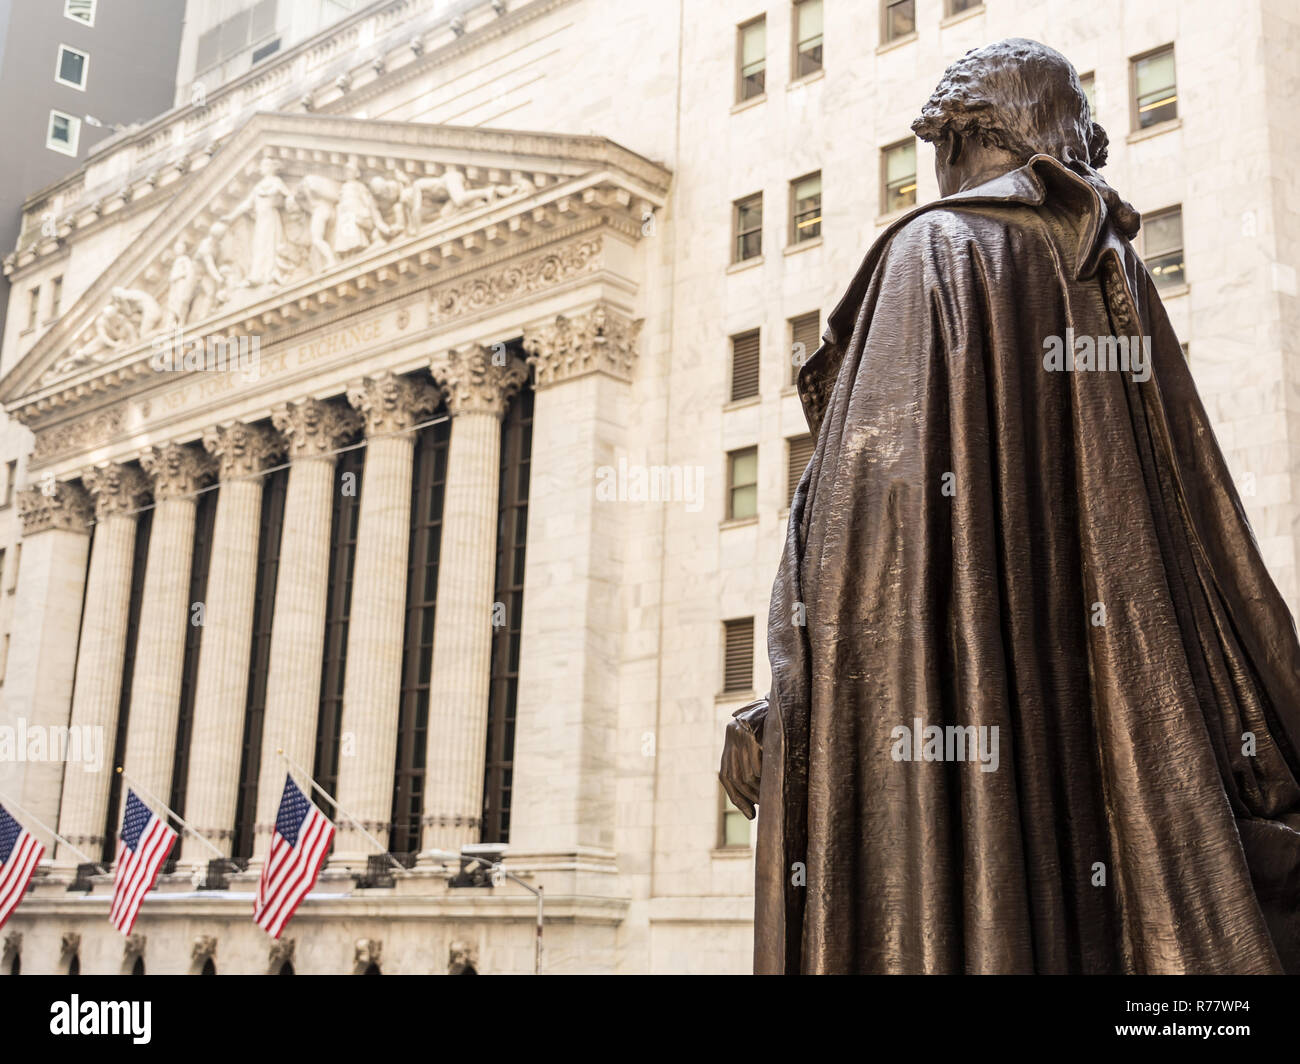 View from Federal Hall of the statue of George Washington and the Stock Exchange building in Wall Street, New York City. Stock Photo